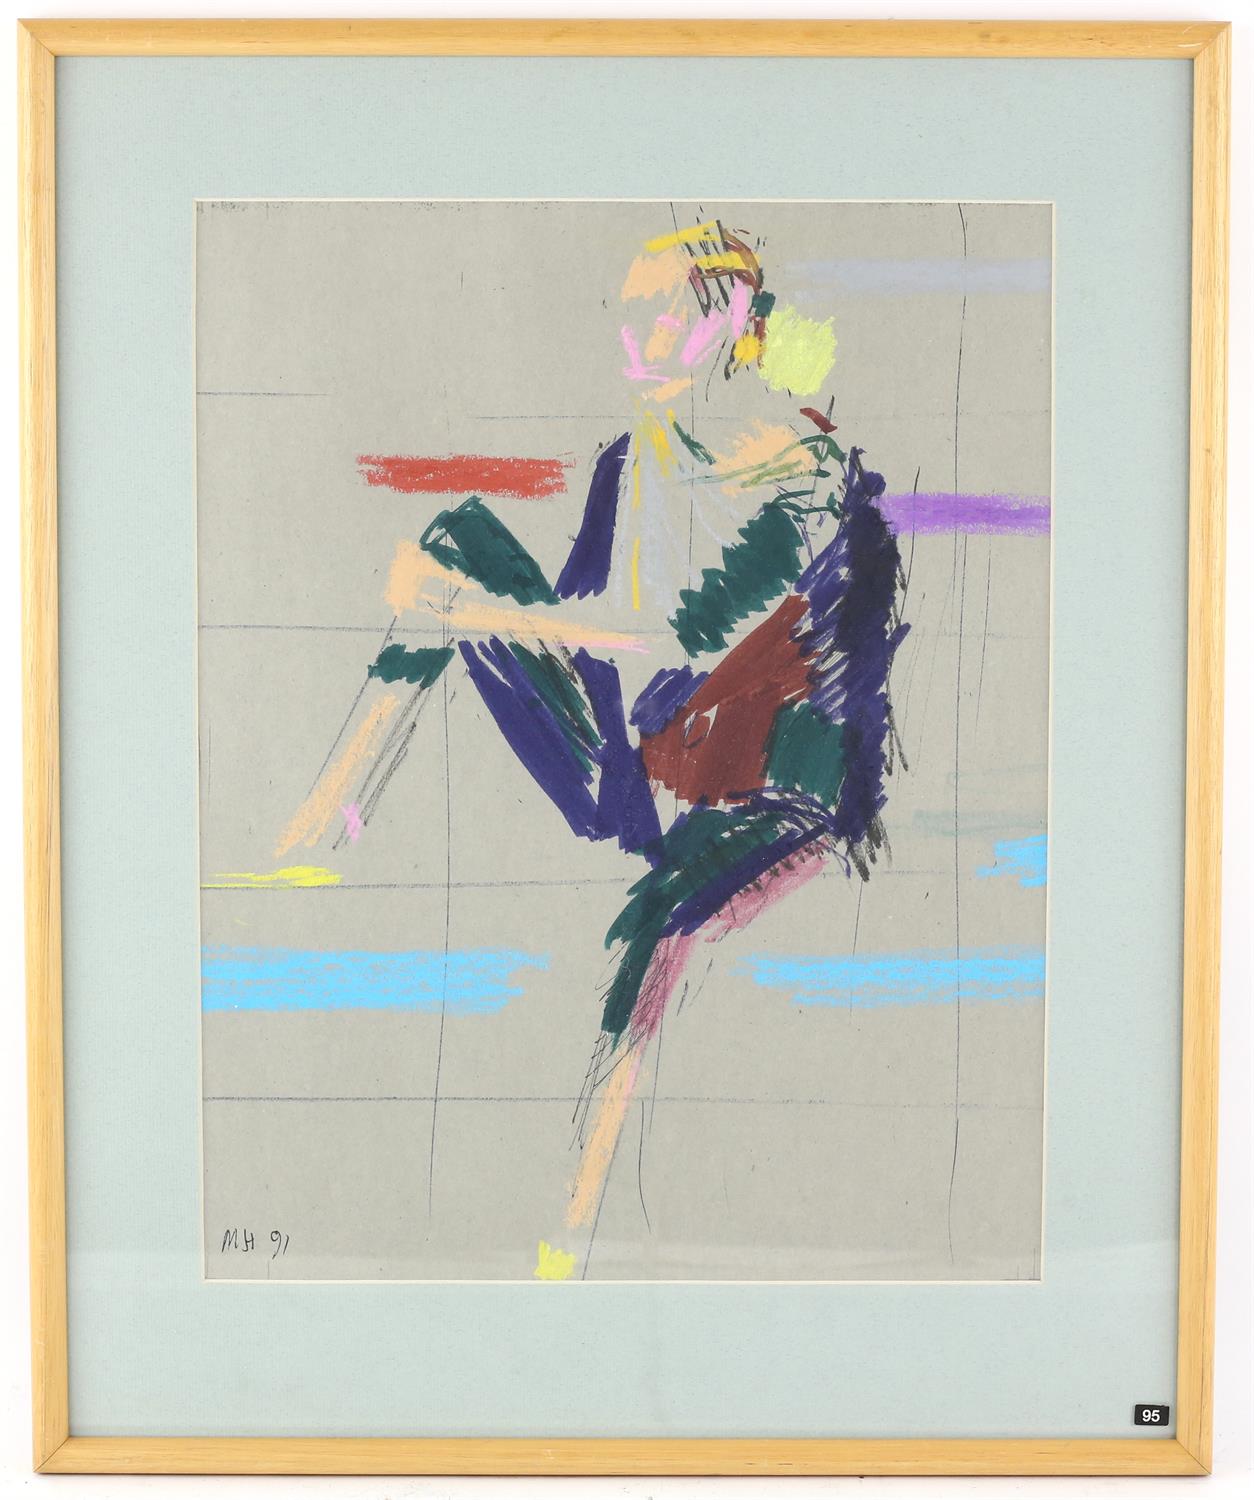 Michael Hutchings (British, 1918-2020), 'Inaction', seated man. Mixed media. Initialled and dated - Image 2 of 4